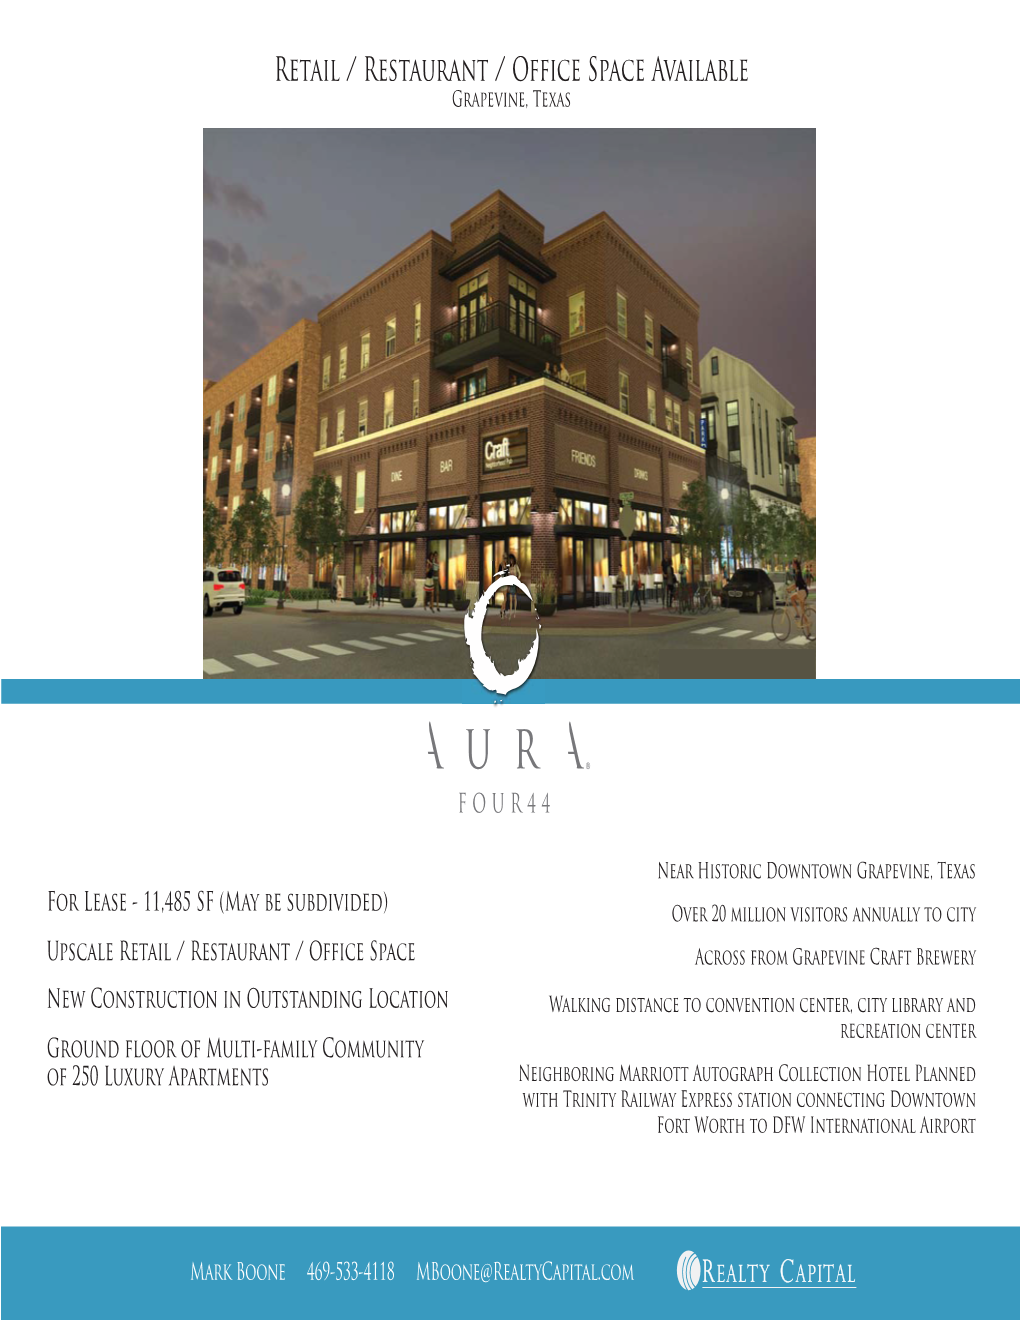 Retail / Restaurant / Office Space Available Grapevine, Texas